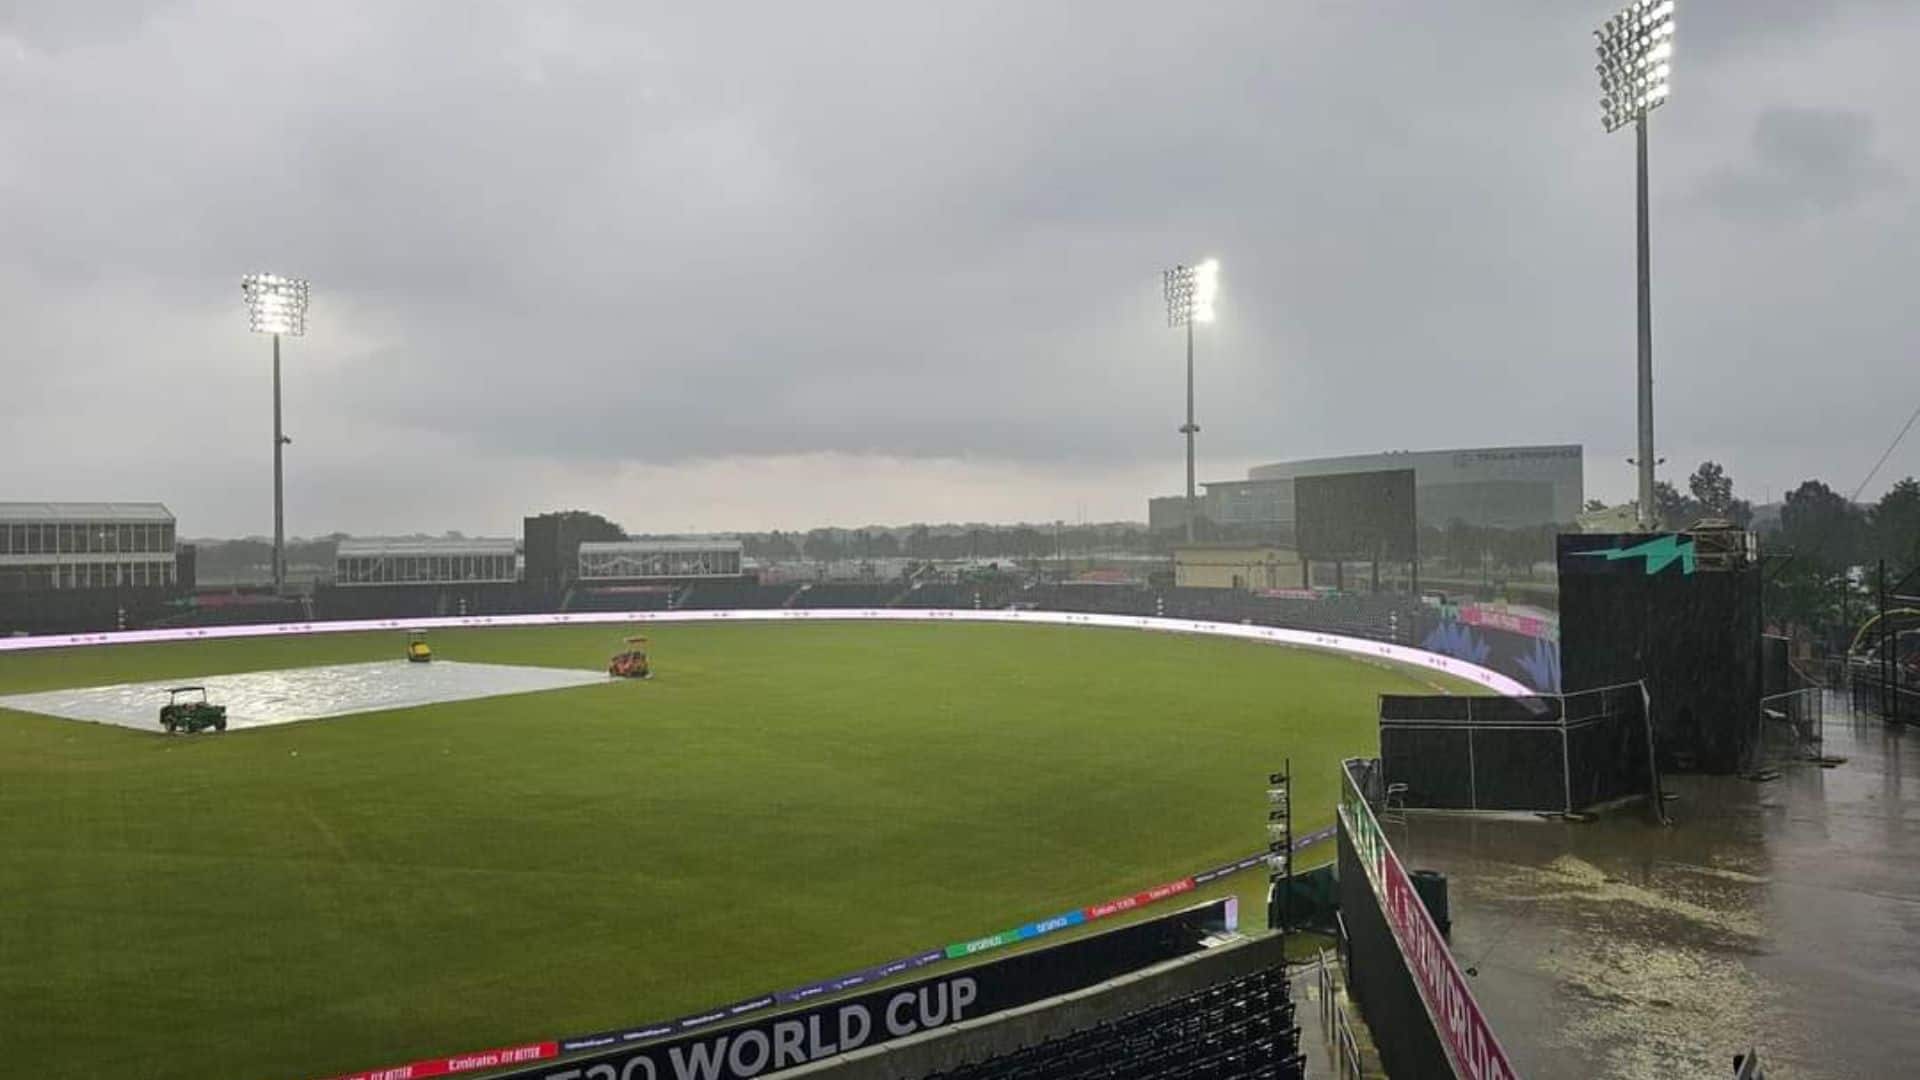 IND vs BAN T20 WC Warm-Up Game To Be Abandoned Due To Rain? Nassau County Stadium Weather Report